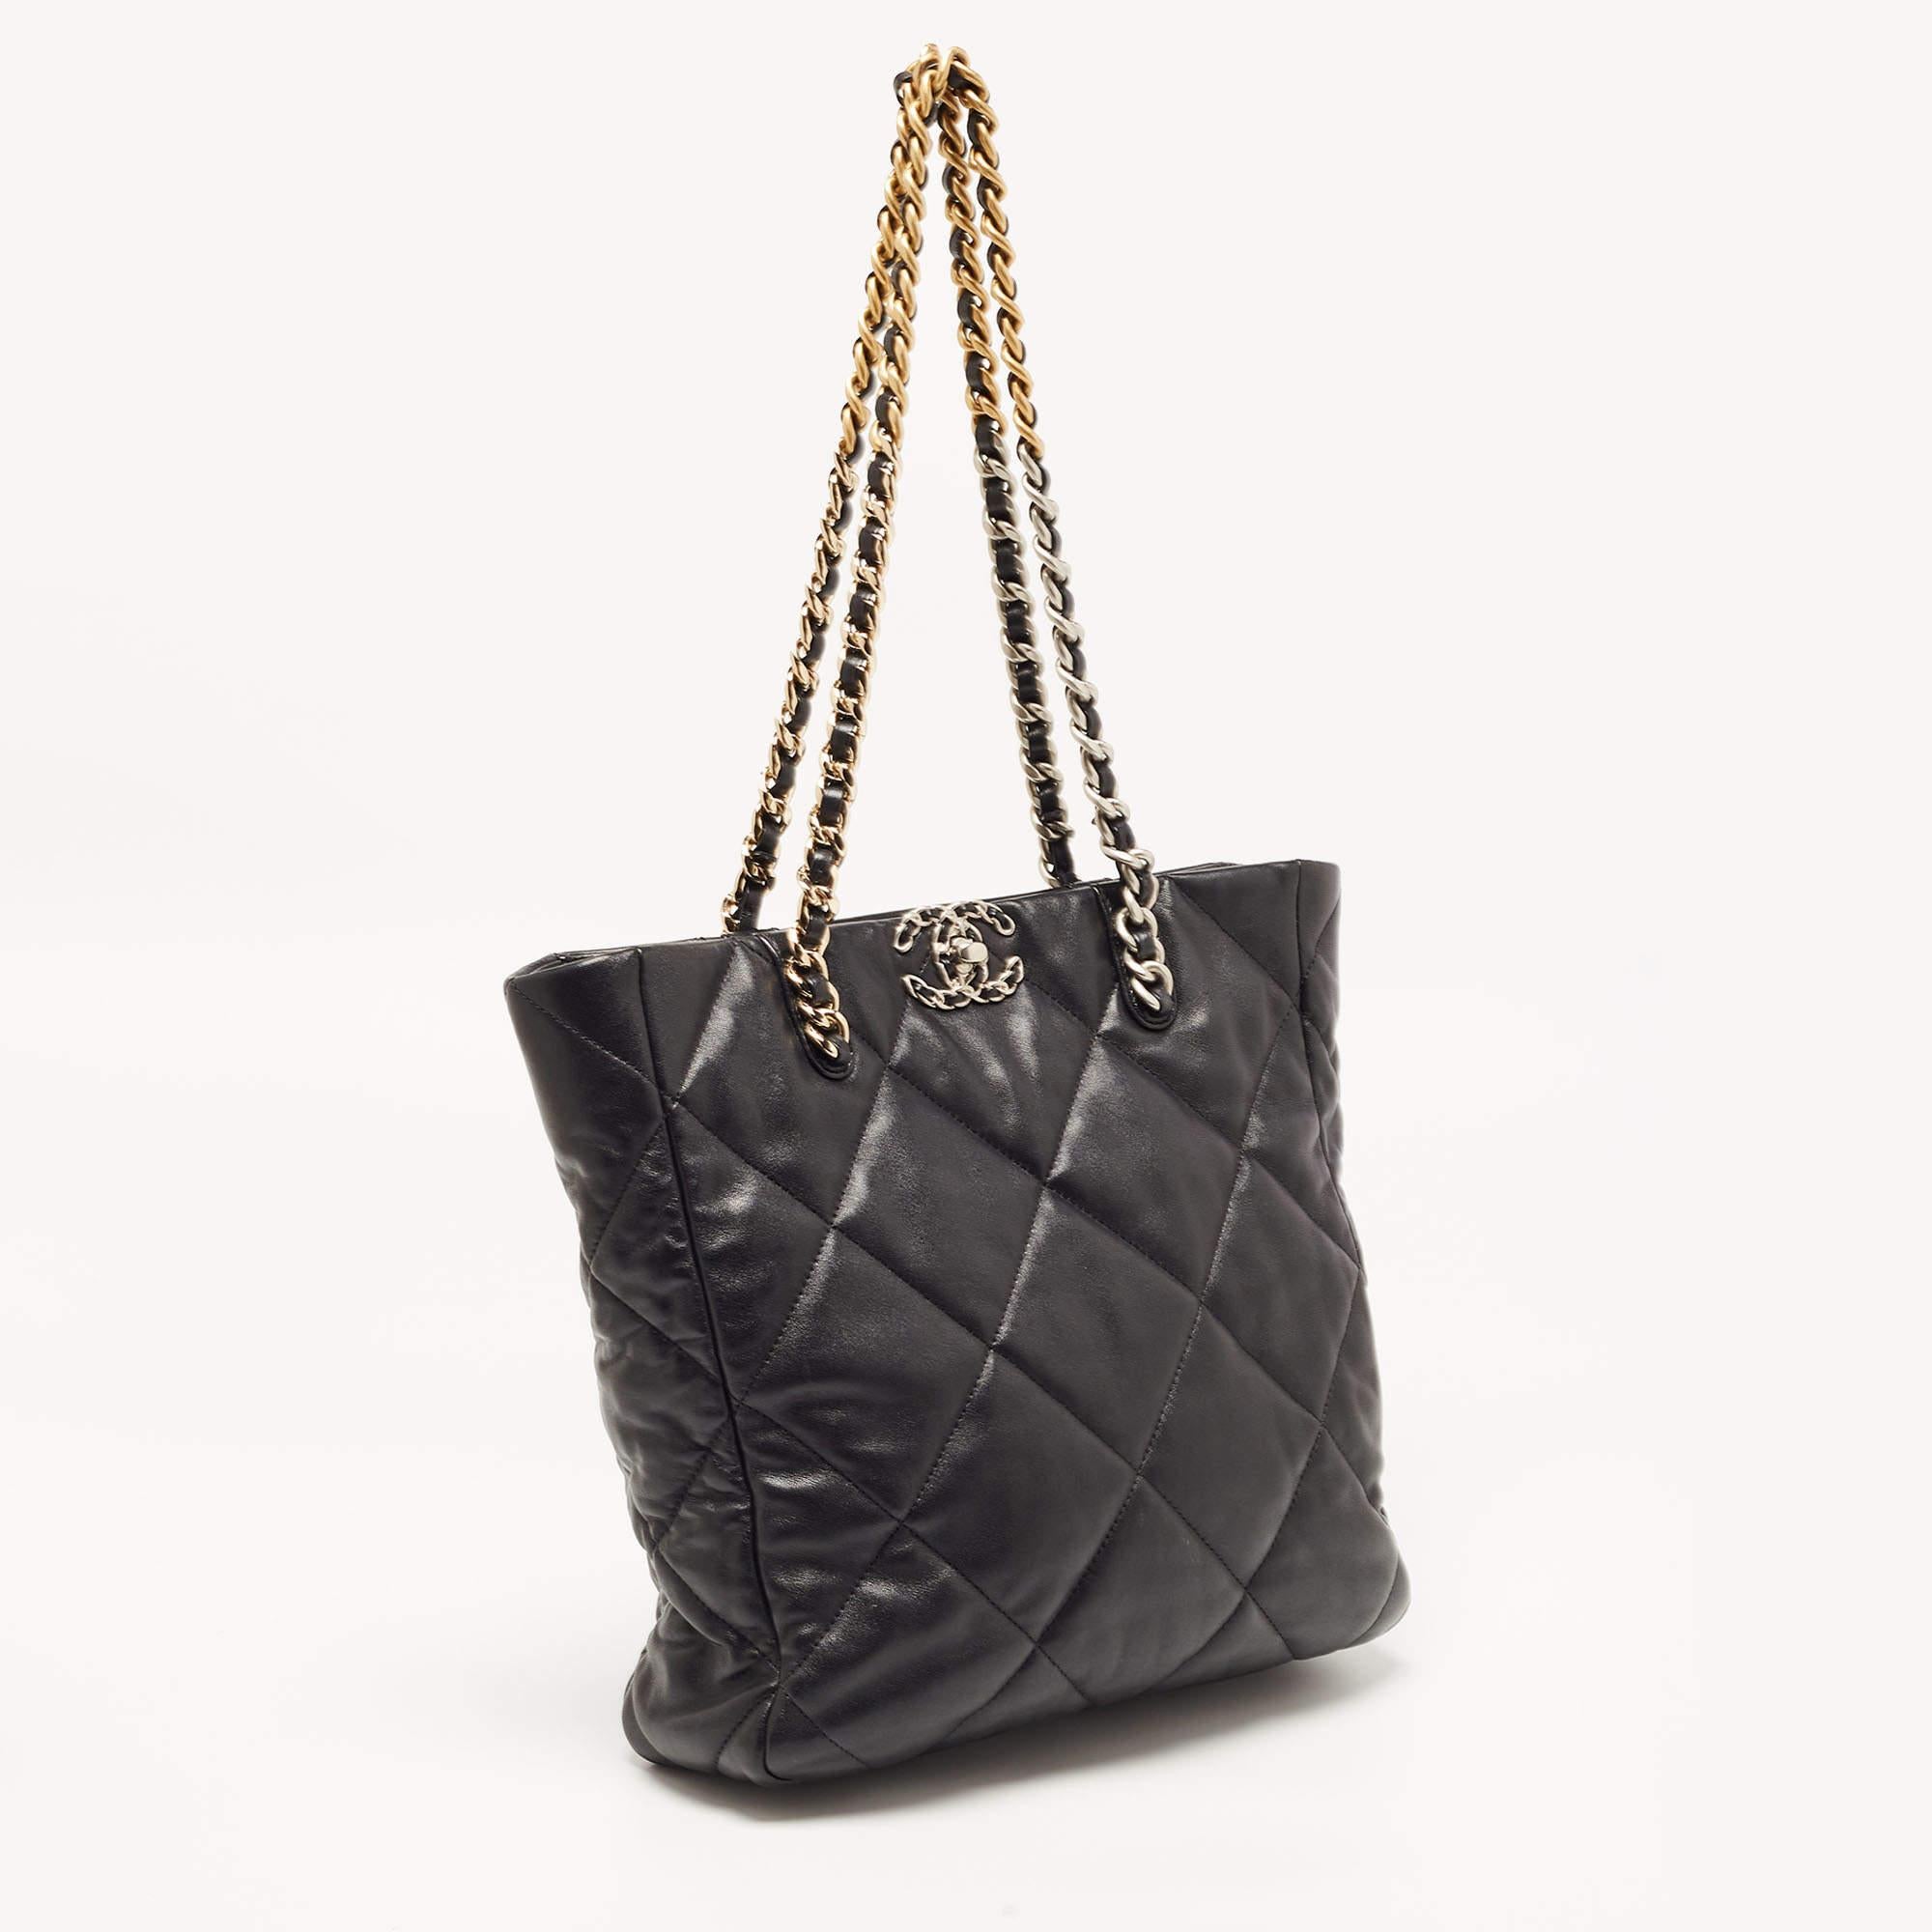 The Chanel 19 Shopper Tote exudes timeless elegance. Crafted from luxurious black quilted leather, it features the iconic Chanel 19 closure in gold-tone hardware. Spacious and versatile, this tote is a perfect blend of style and functionality,